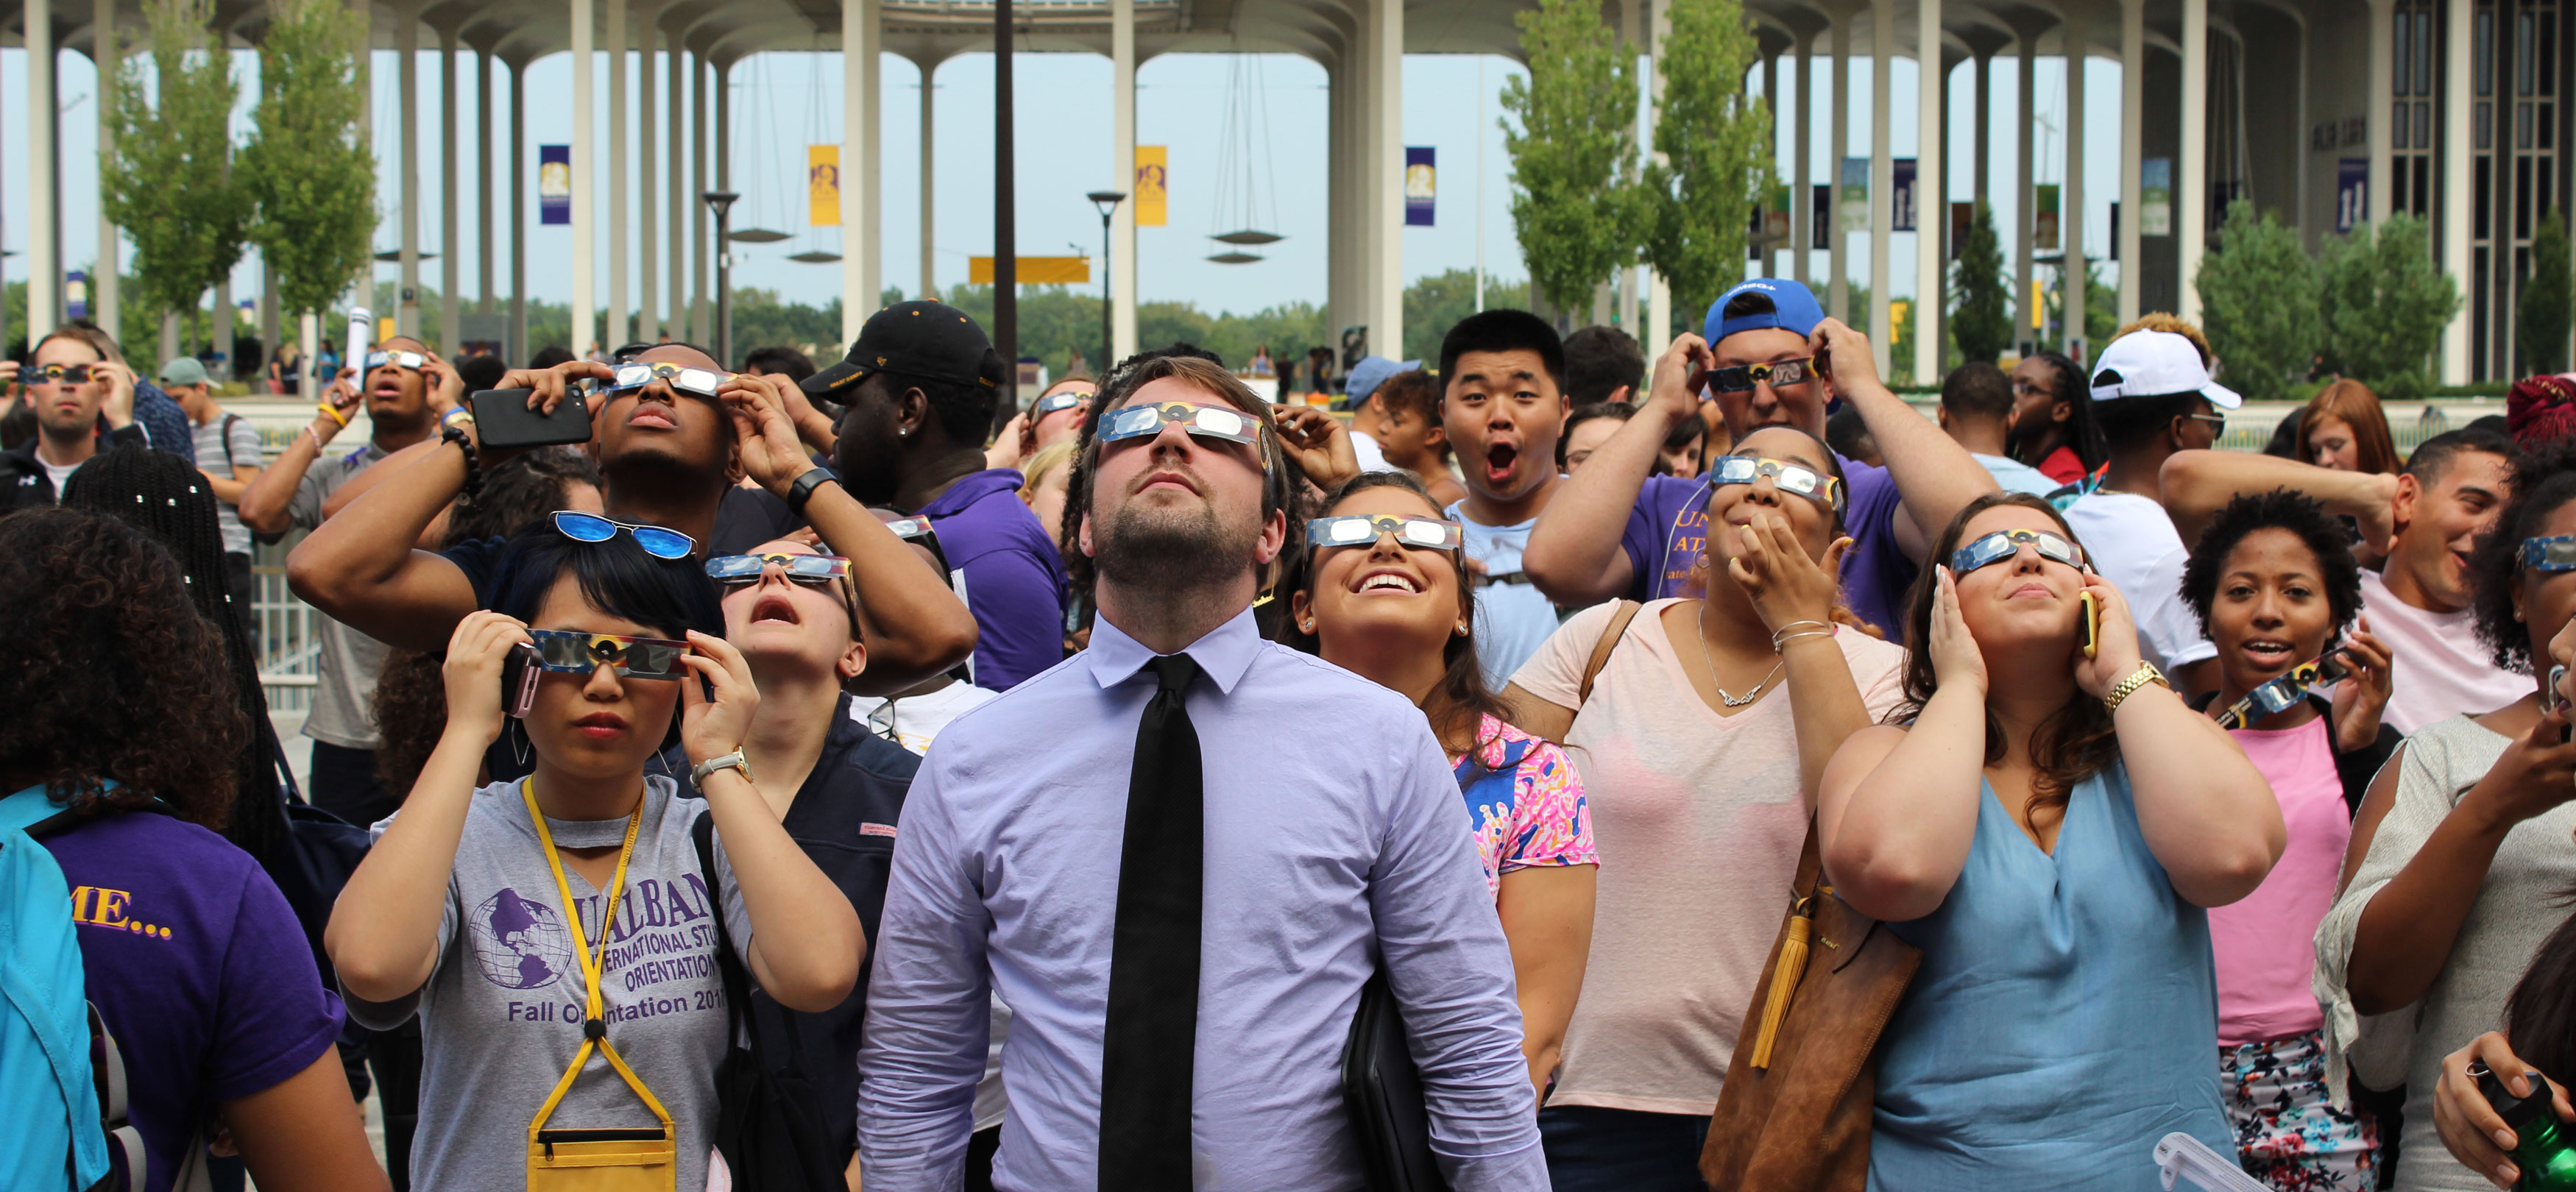 A crowd of people wearing eclipse glasses looks up at the sky ahead of the 2017 solar eclipse.